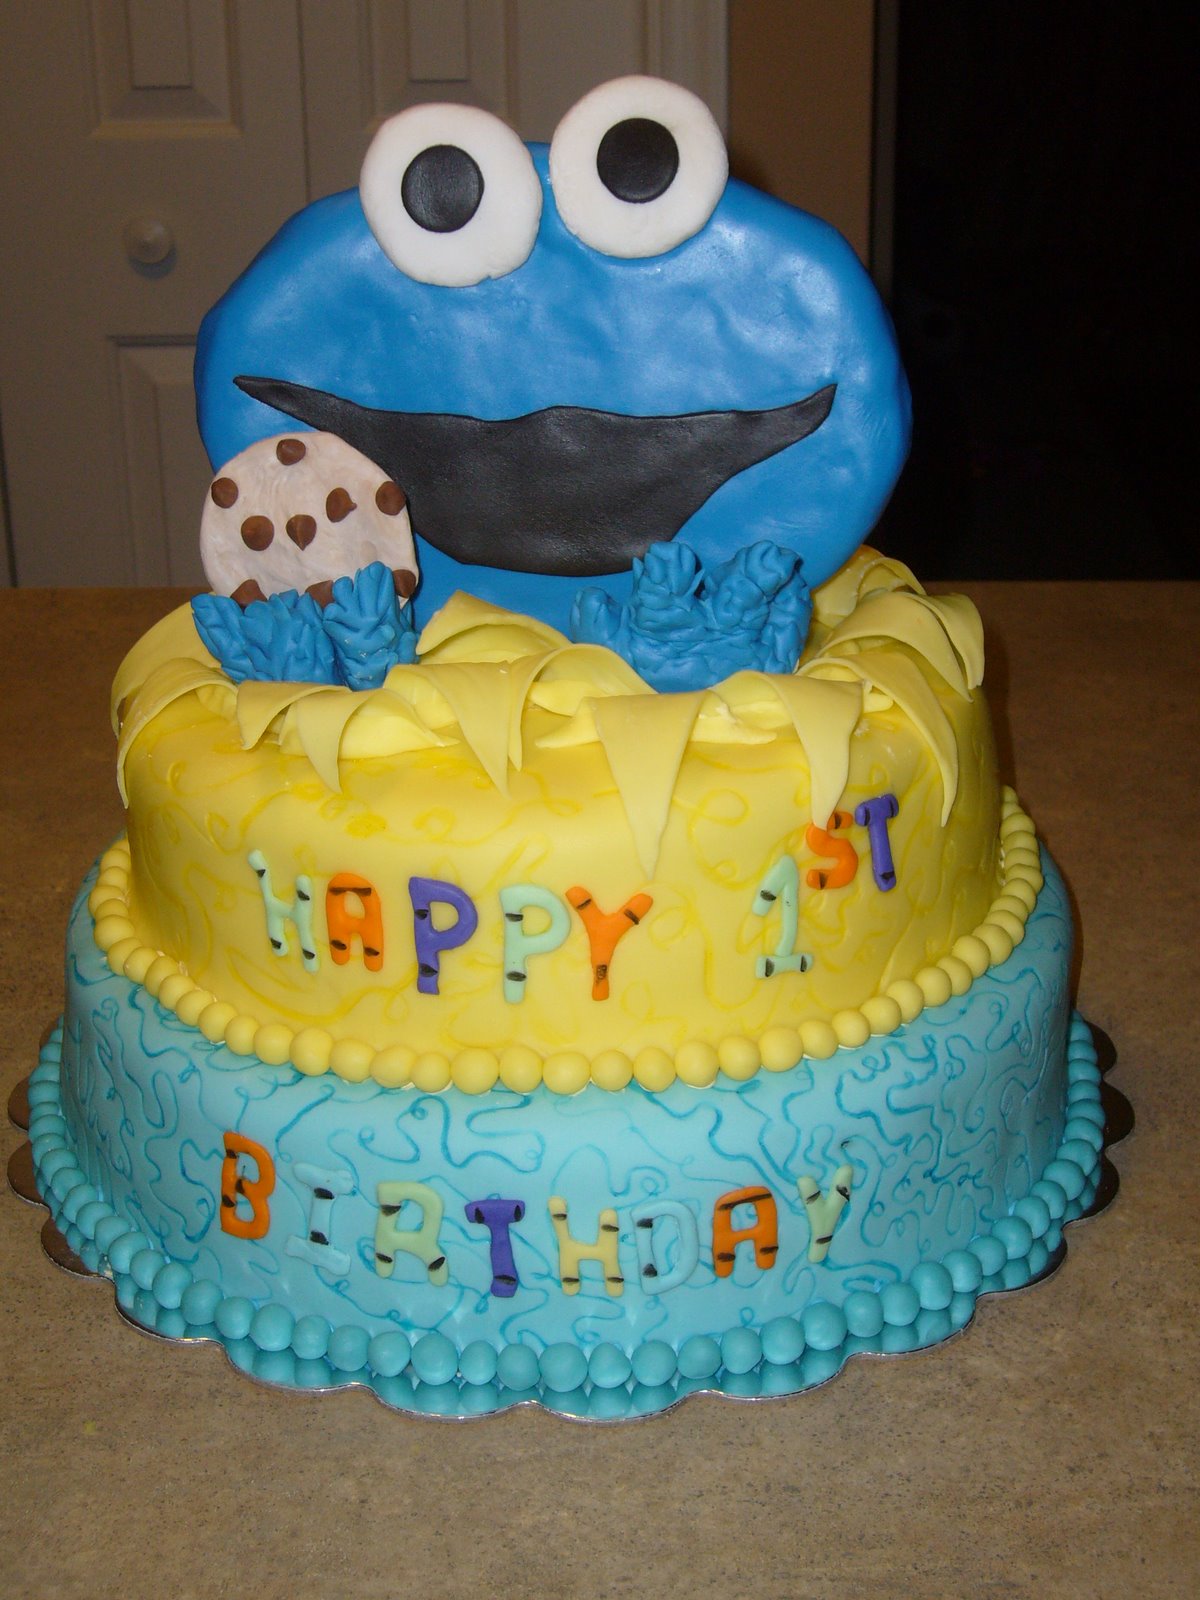 cookie-monster-cakes-decoration-ideas-little-birthday-cakes